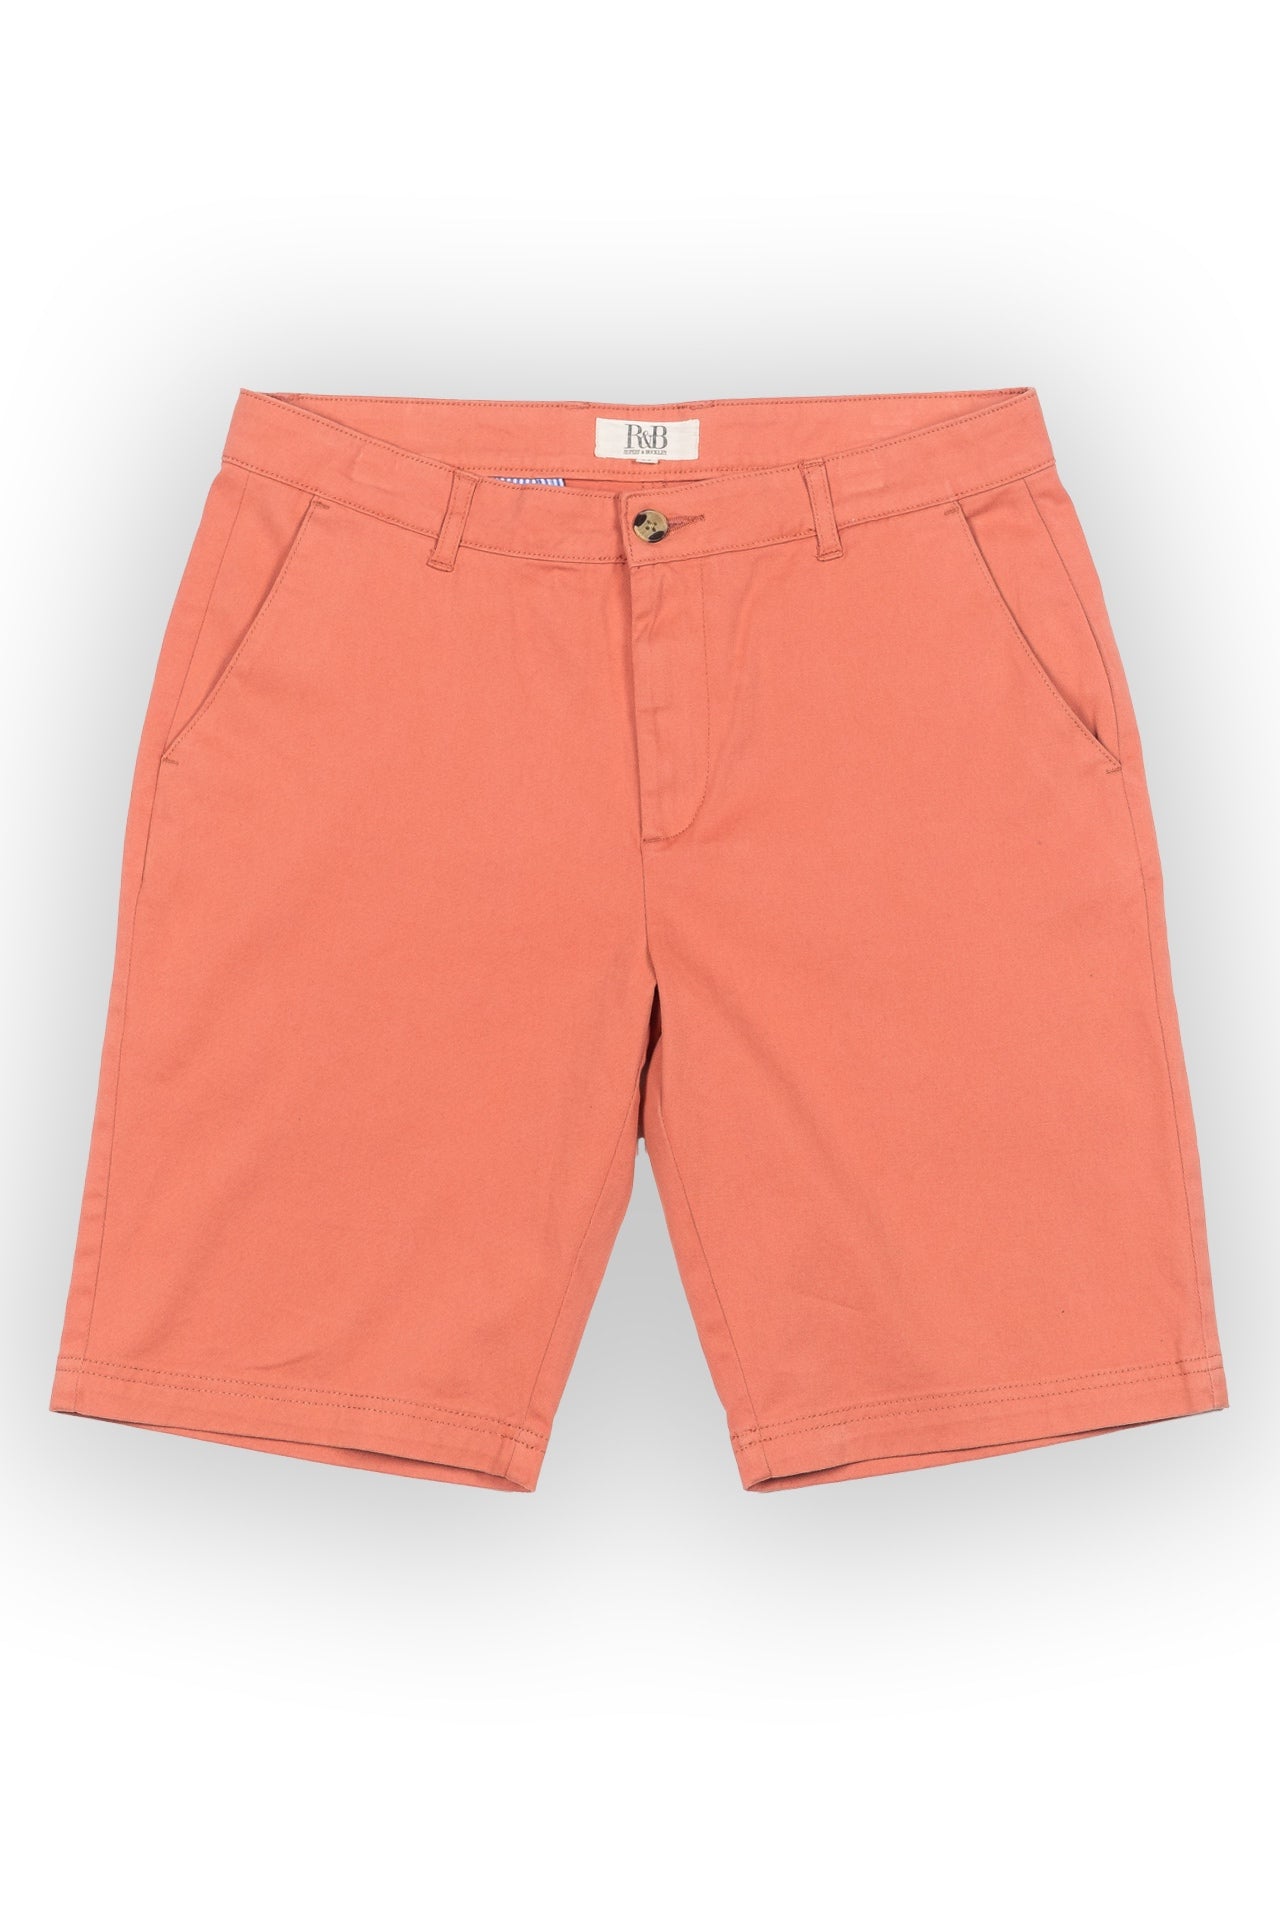 Spencer Red Chino Shorts - Rupert and Buckley - Shorts